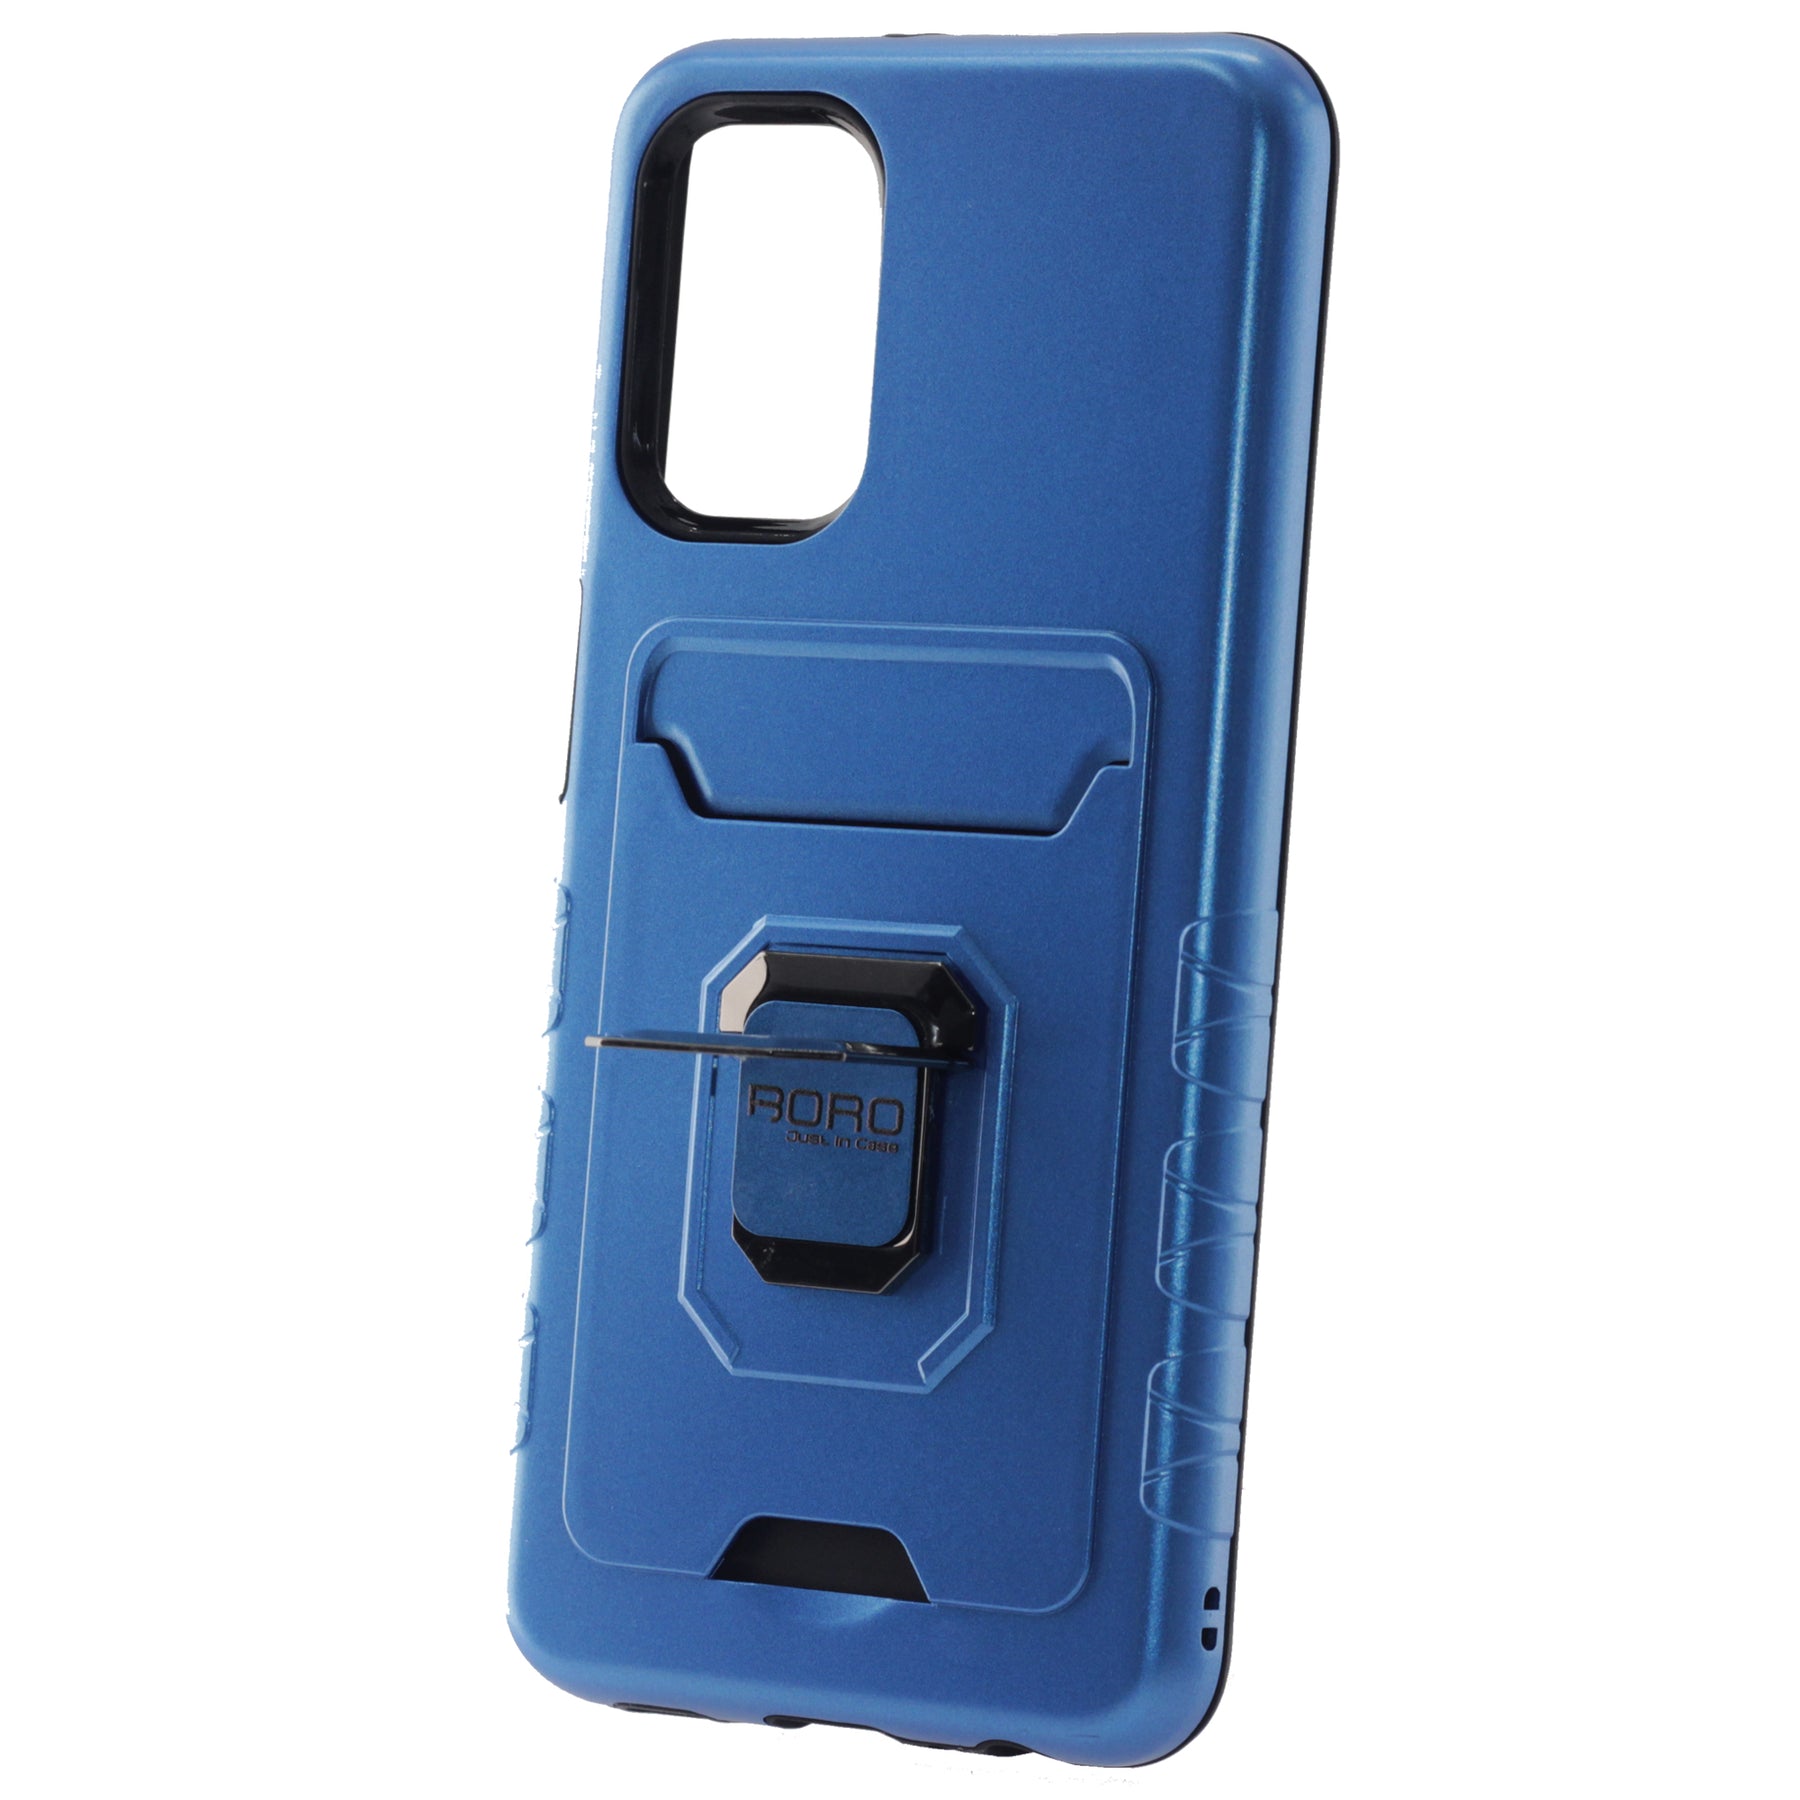 BORO Case For Samsung A32 5G, With Card Holder Function, 